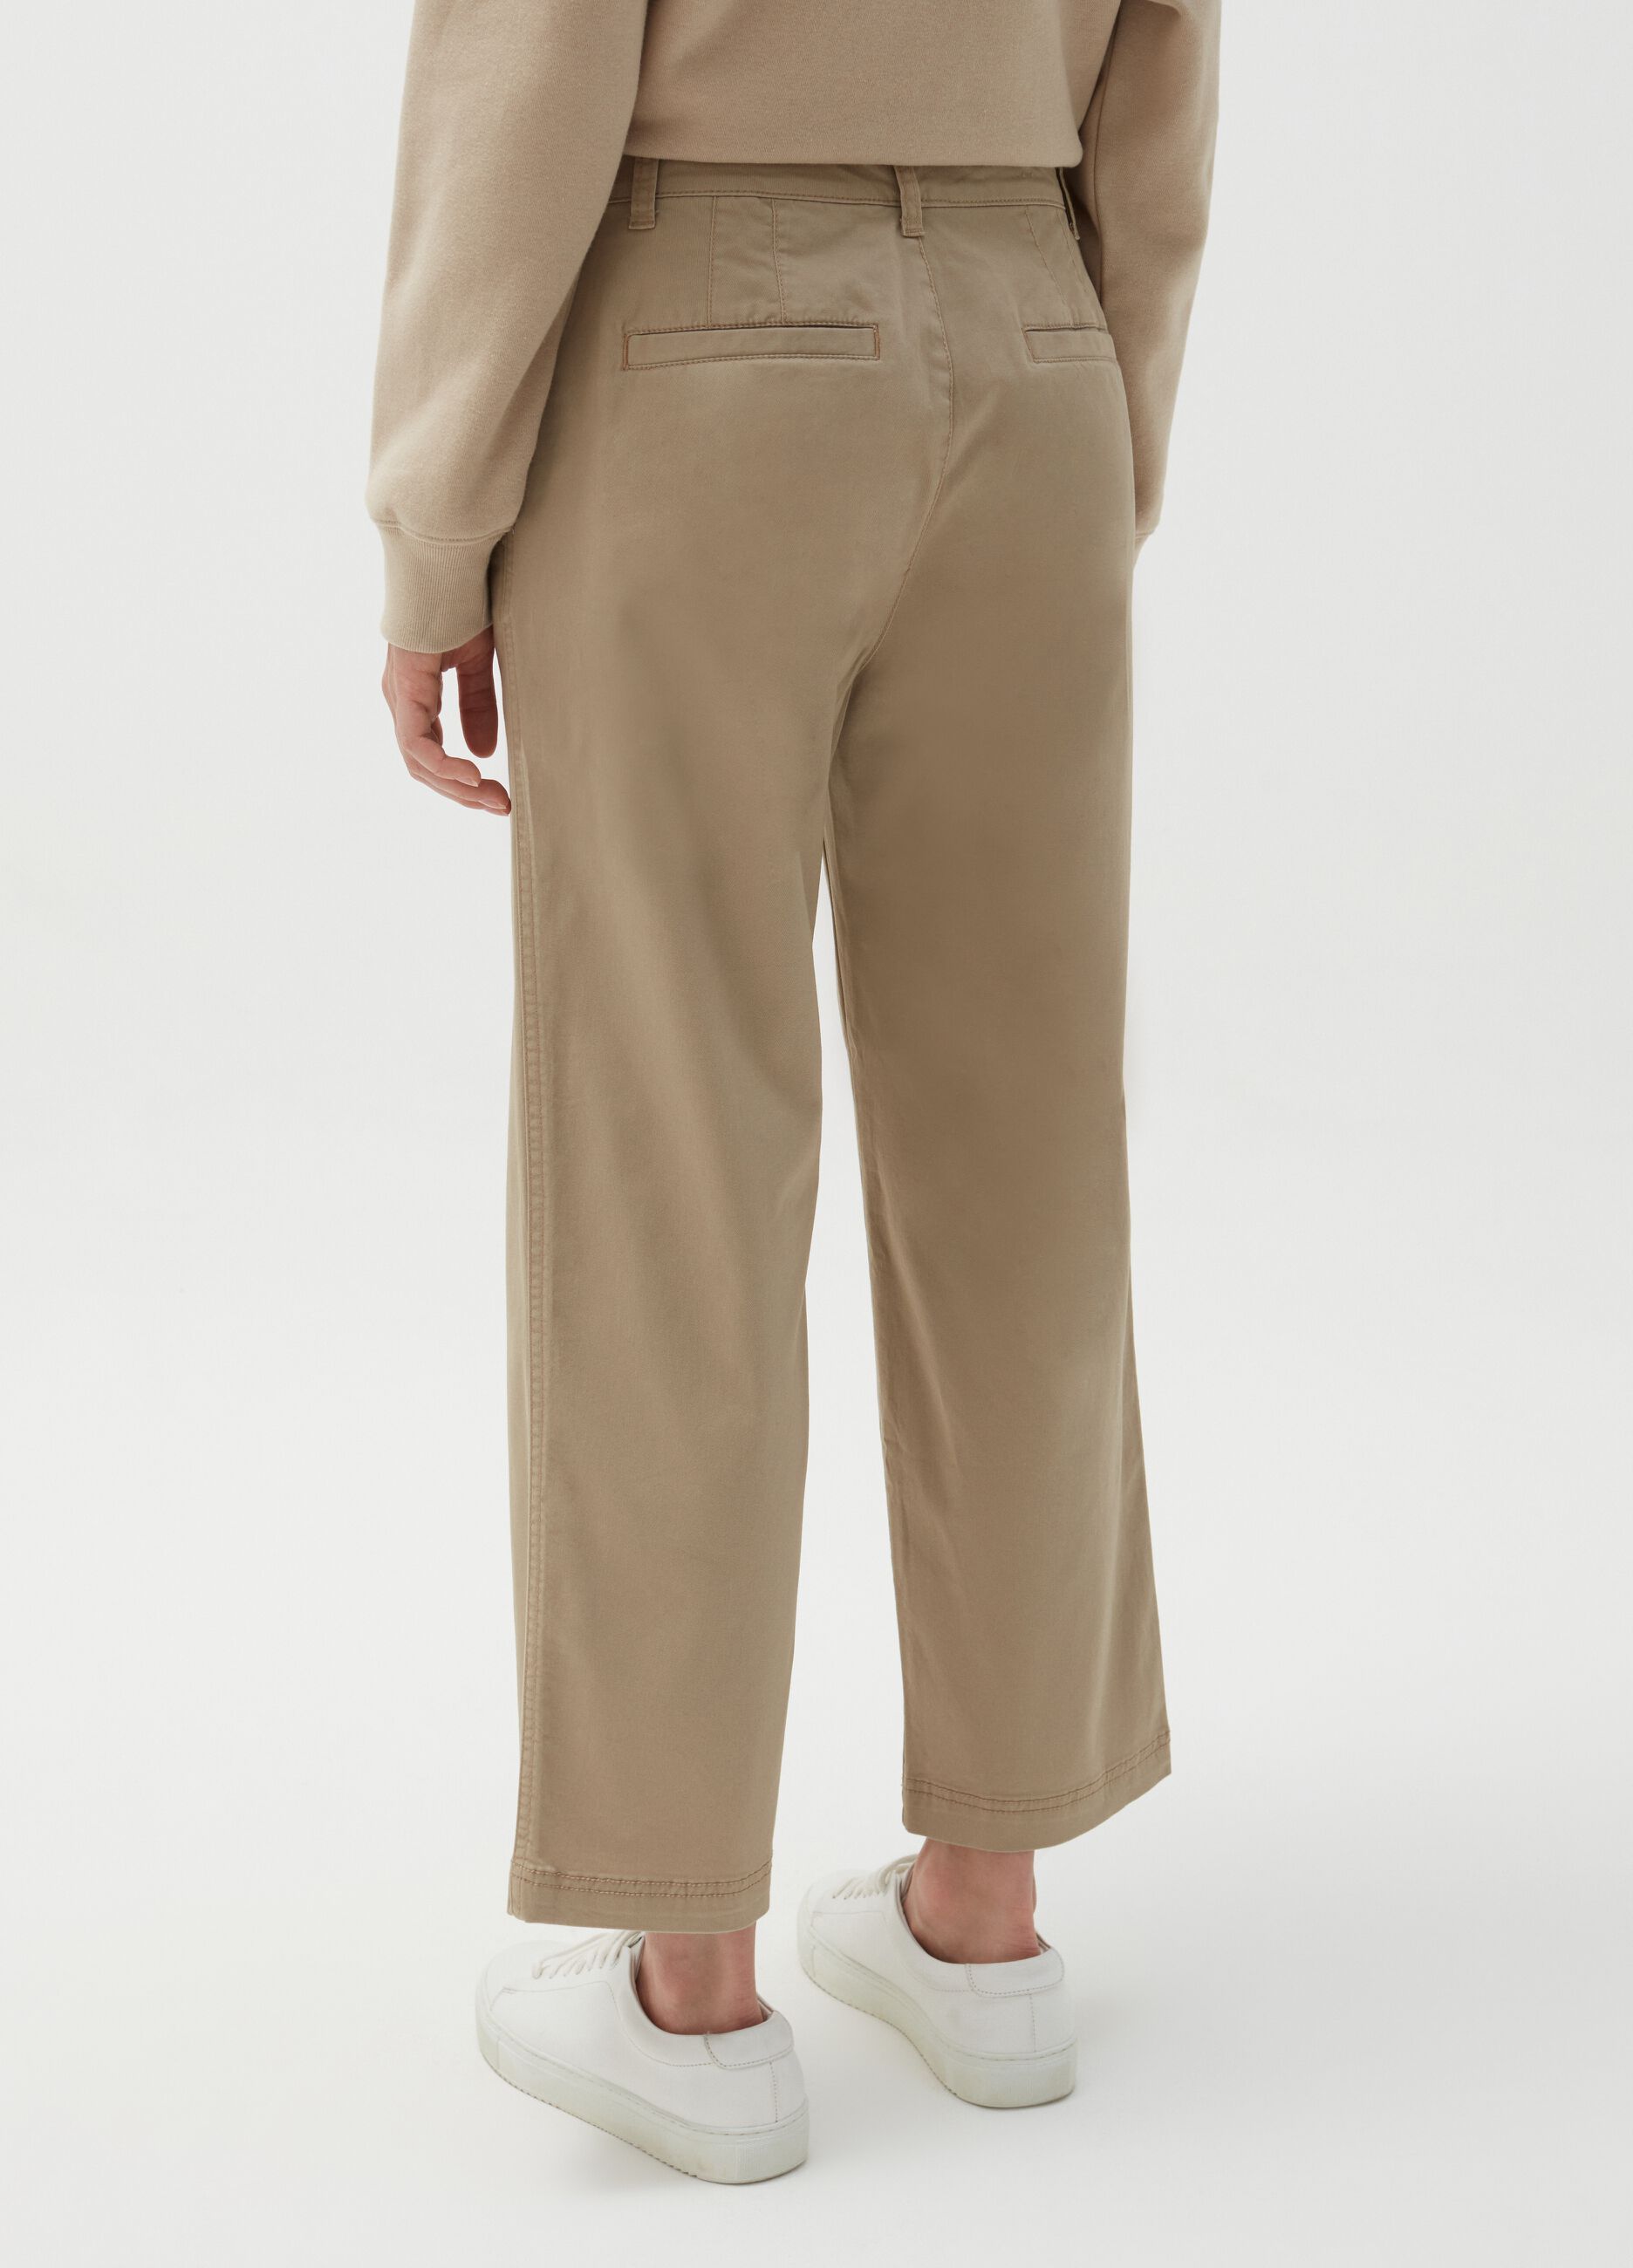 Girlfriend-fit cotton trousers_2